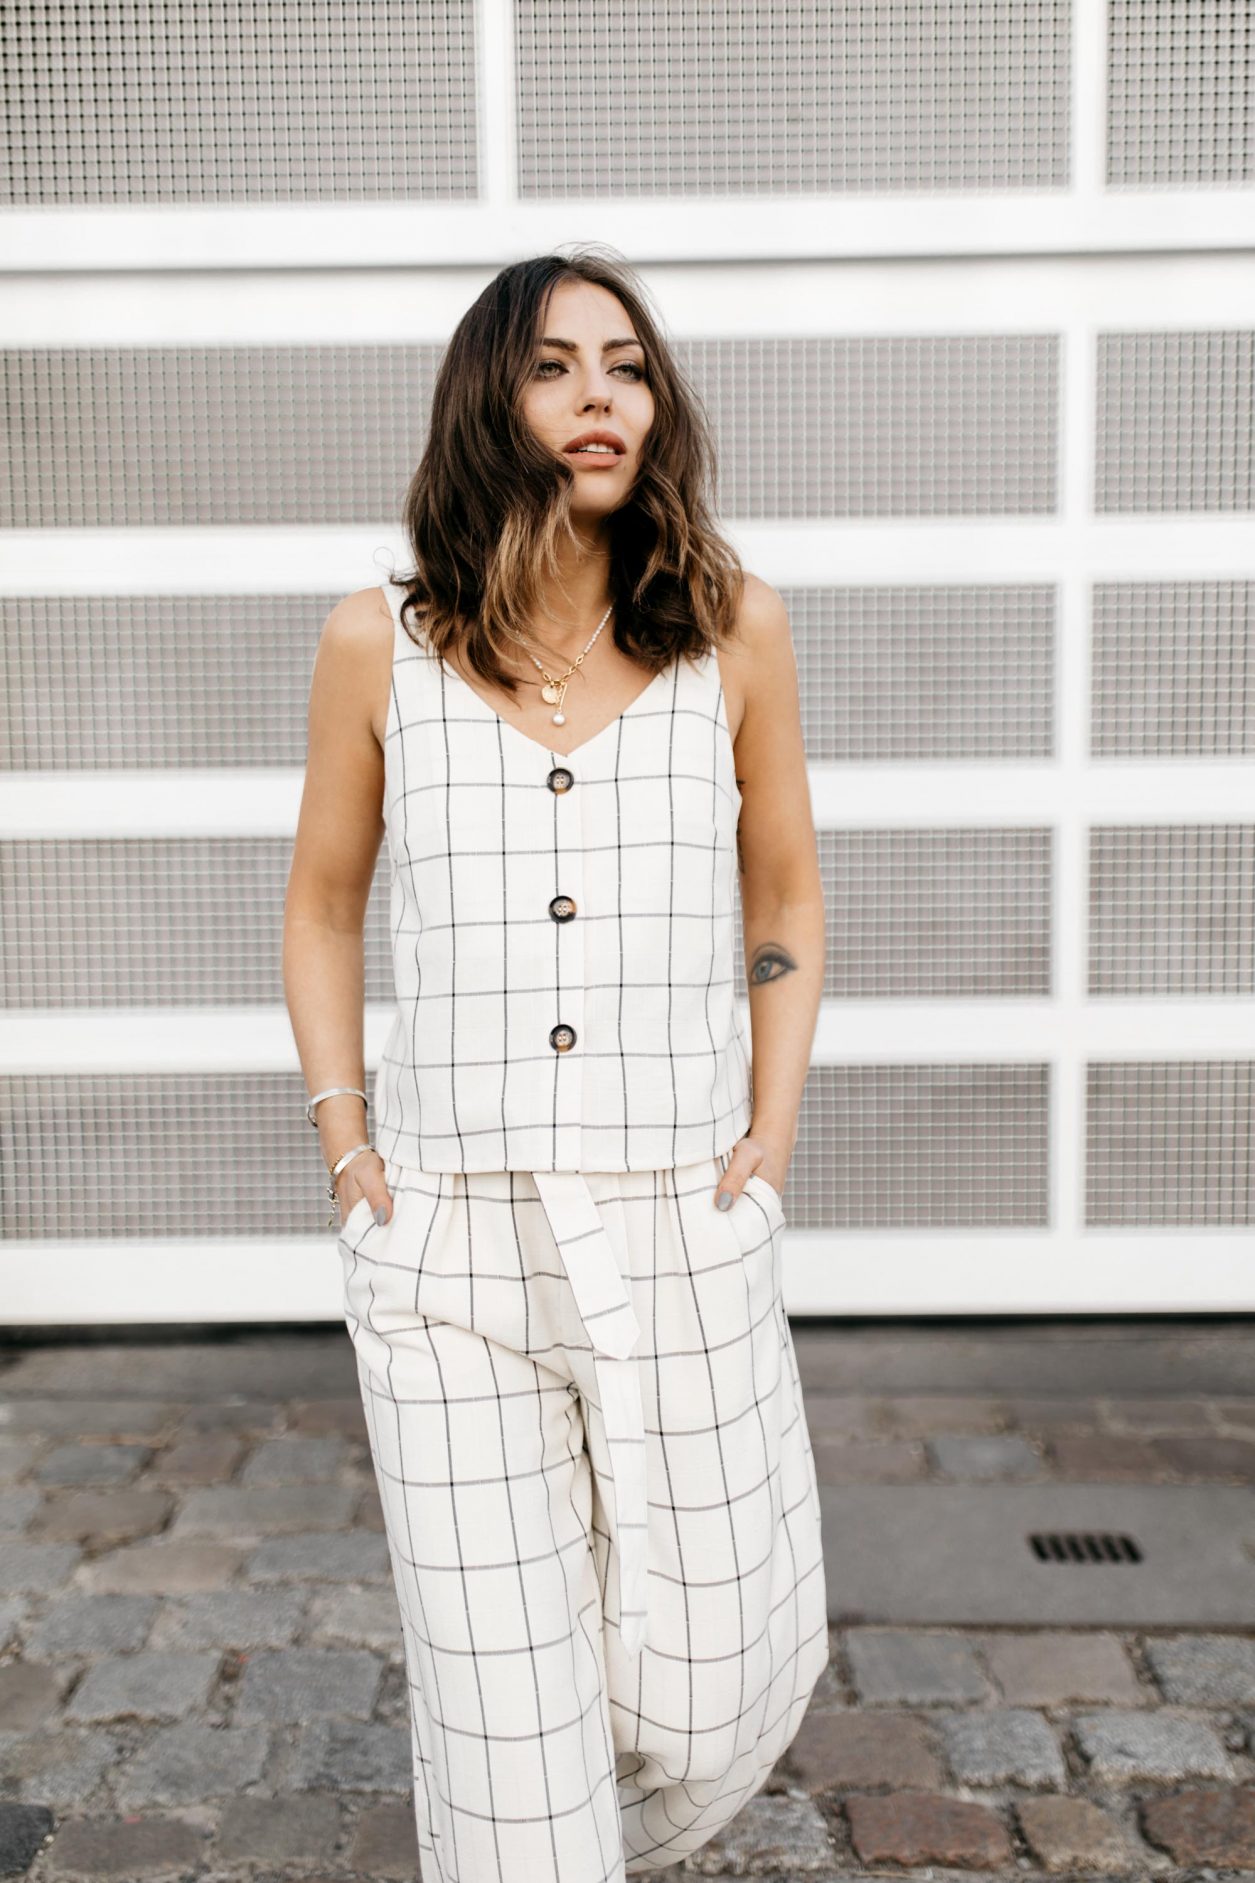 Anzeige | Streetstyle Outfit by Masha Sedgwick | Fashion blogger from Berlin, Germany | Spring summer outfit inspiration, two-pieces checked look in white linen from Gestuz